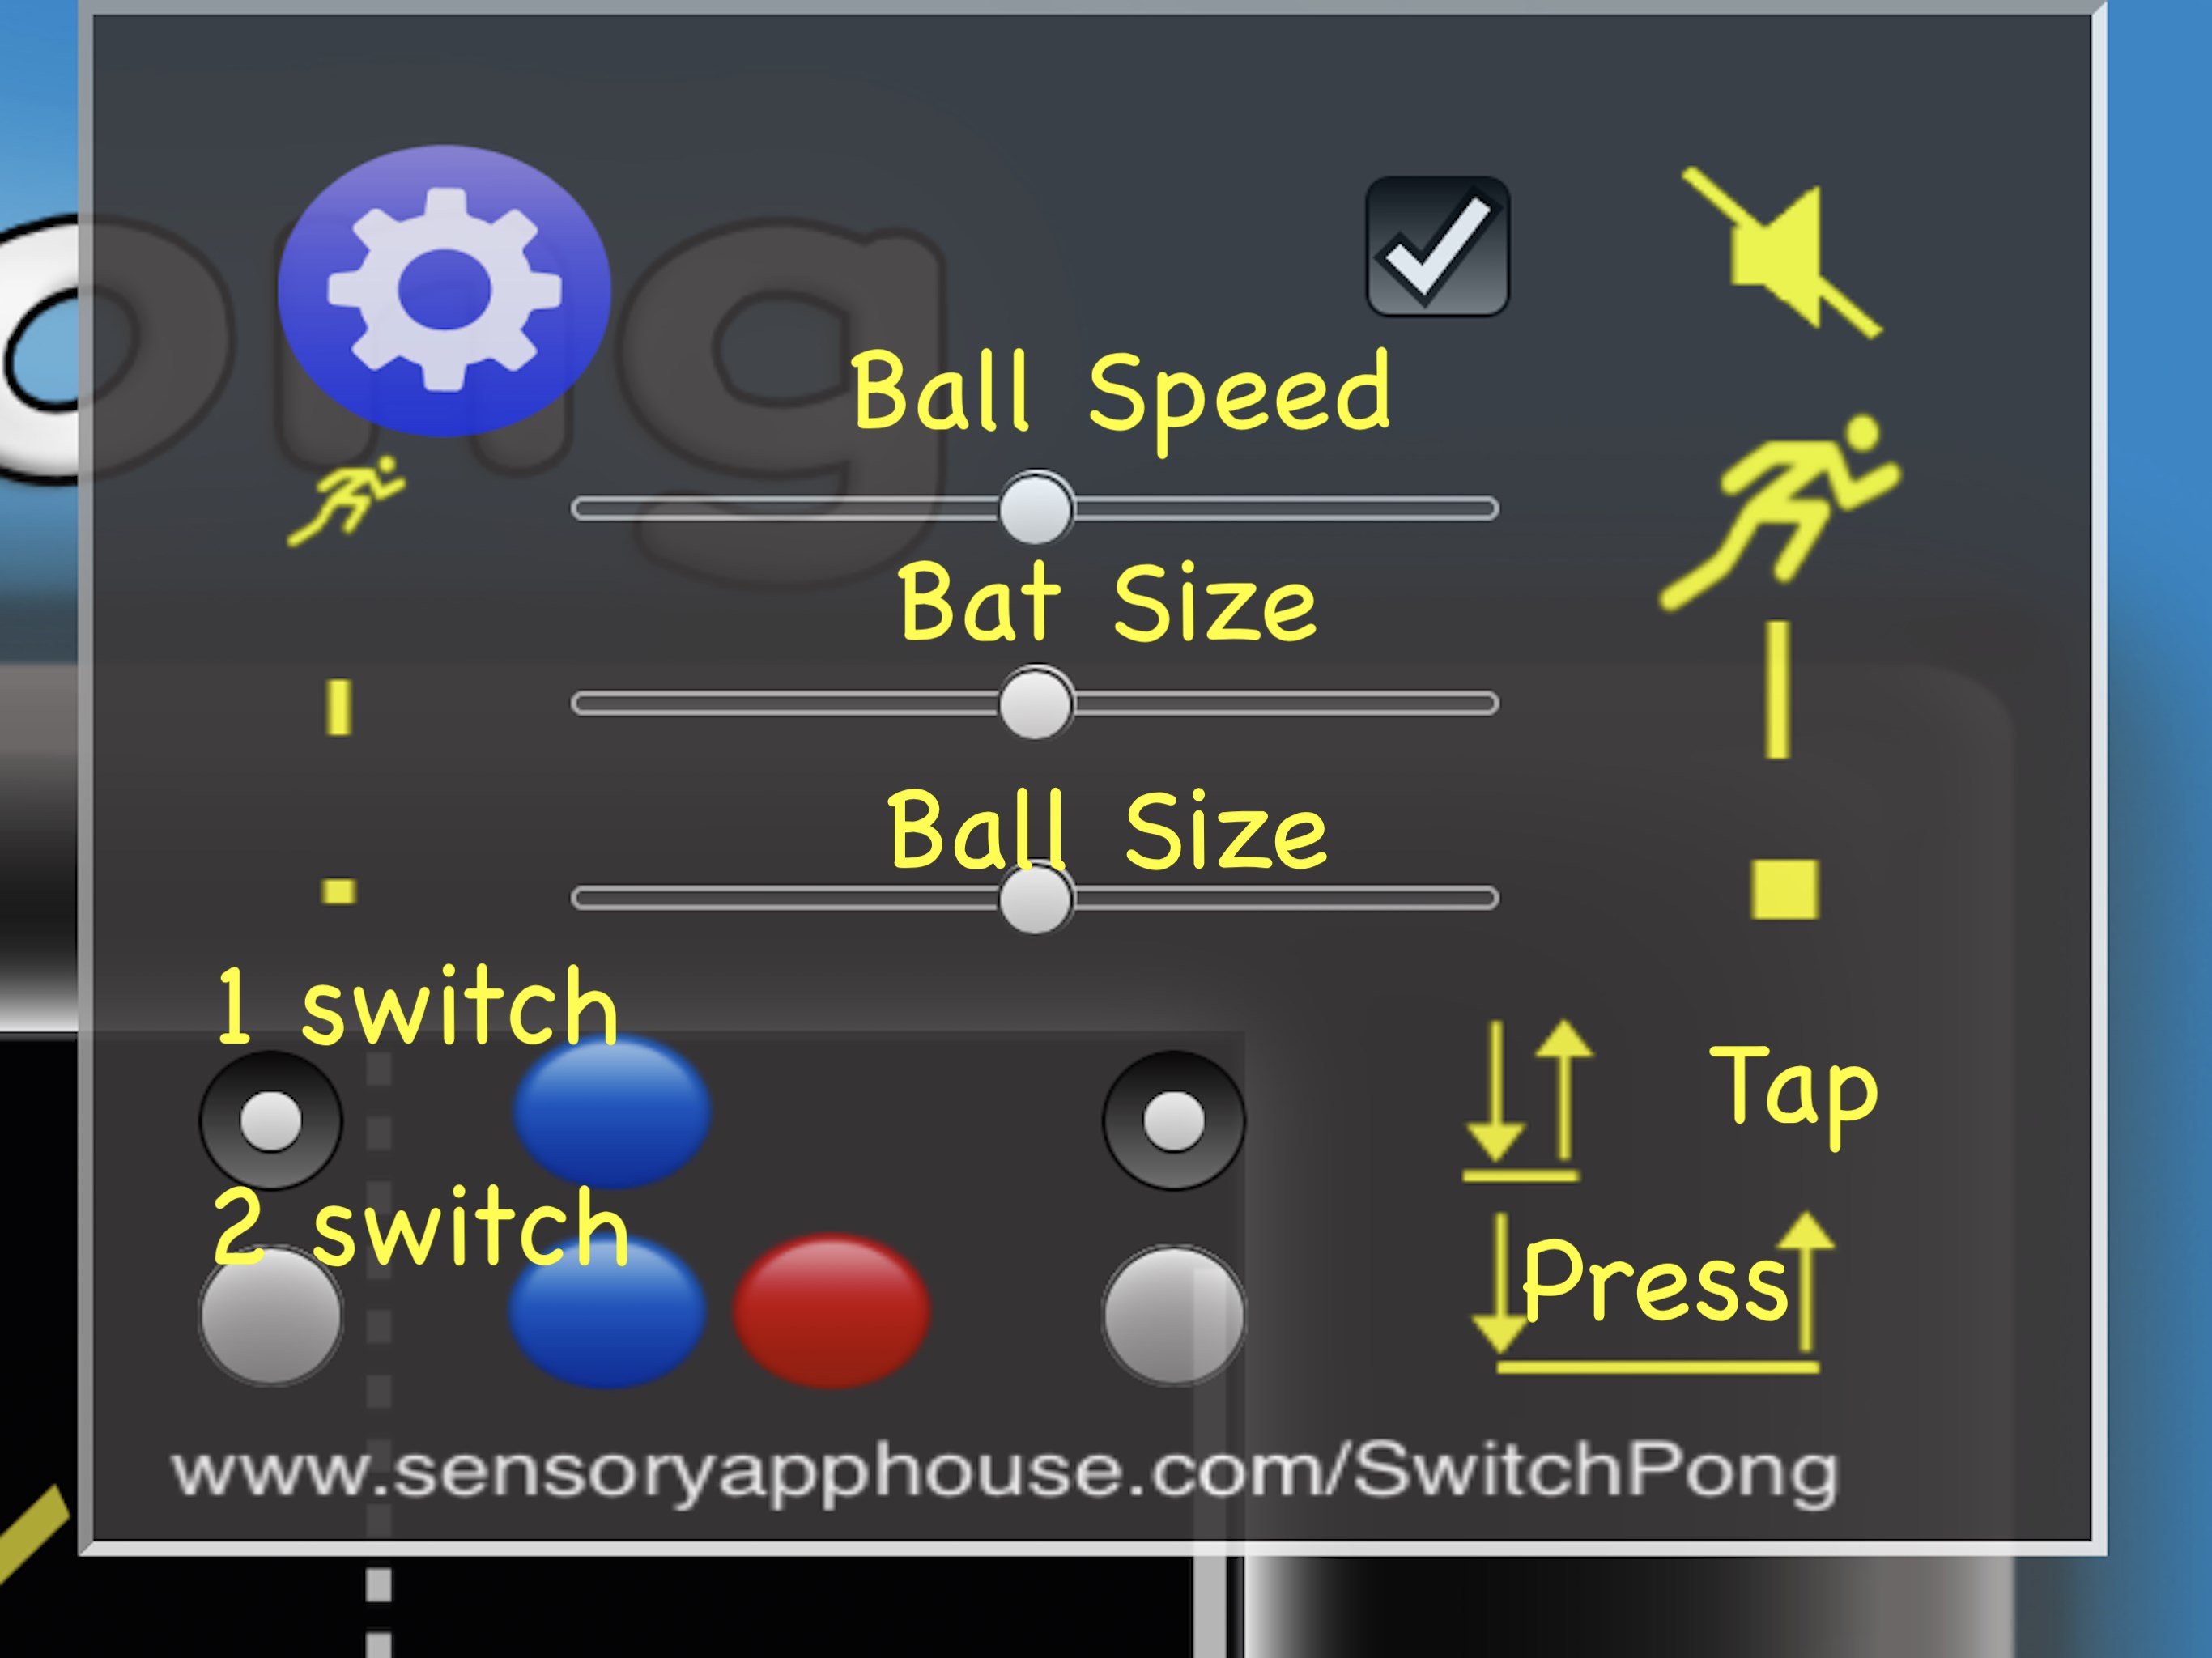 Switch Pong 